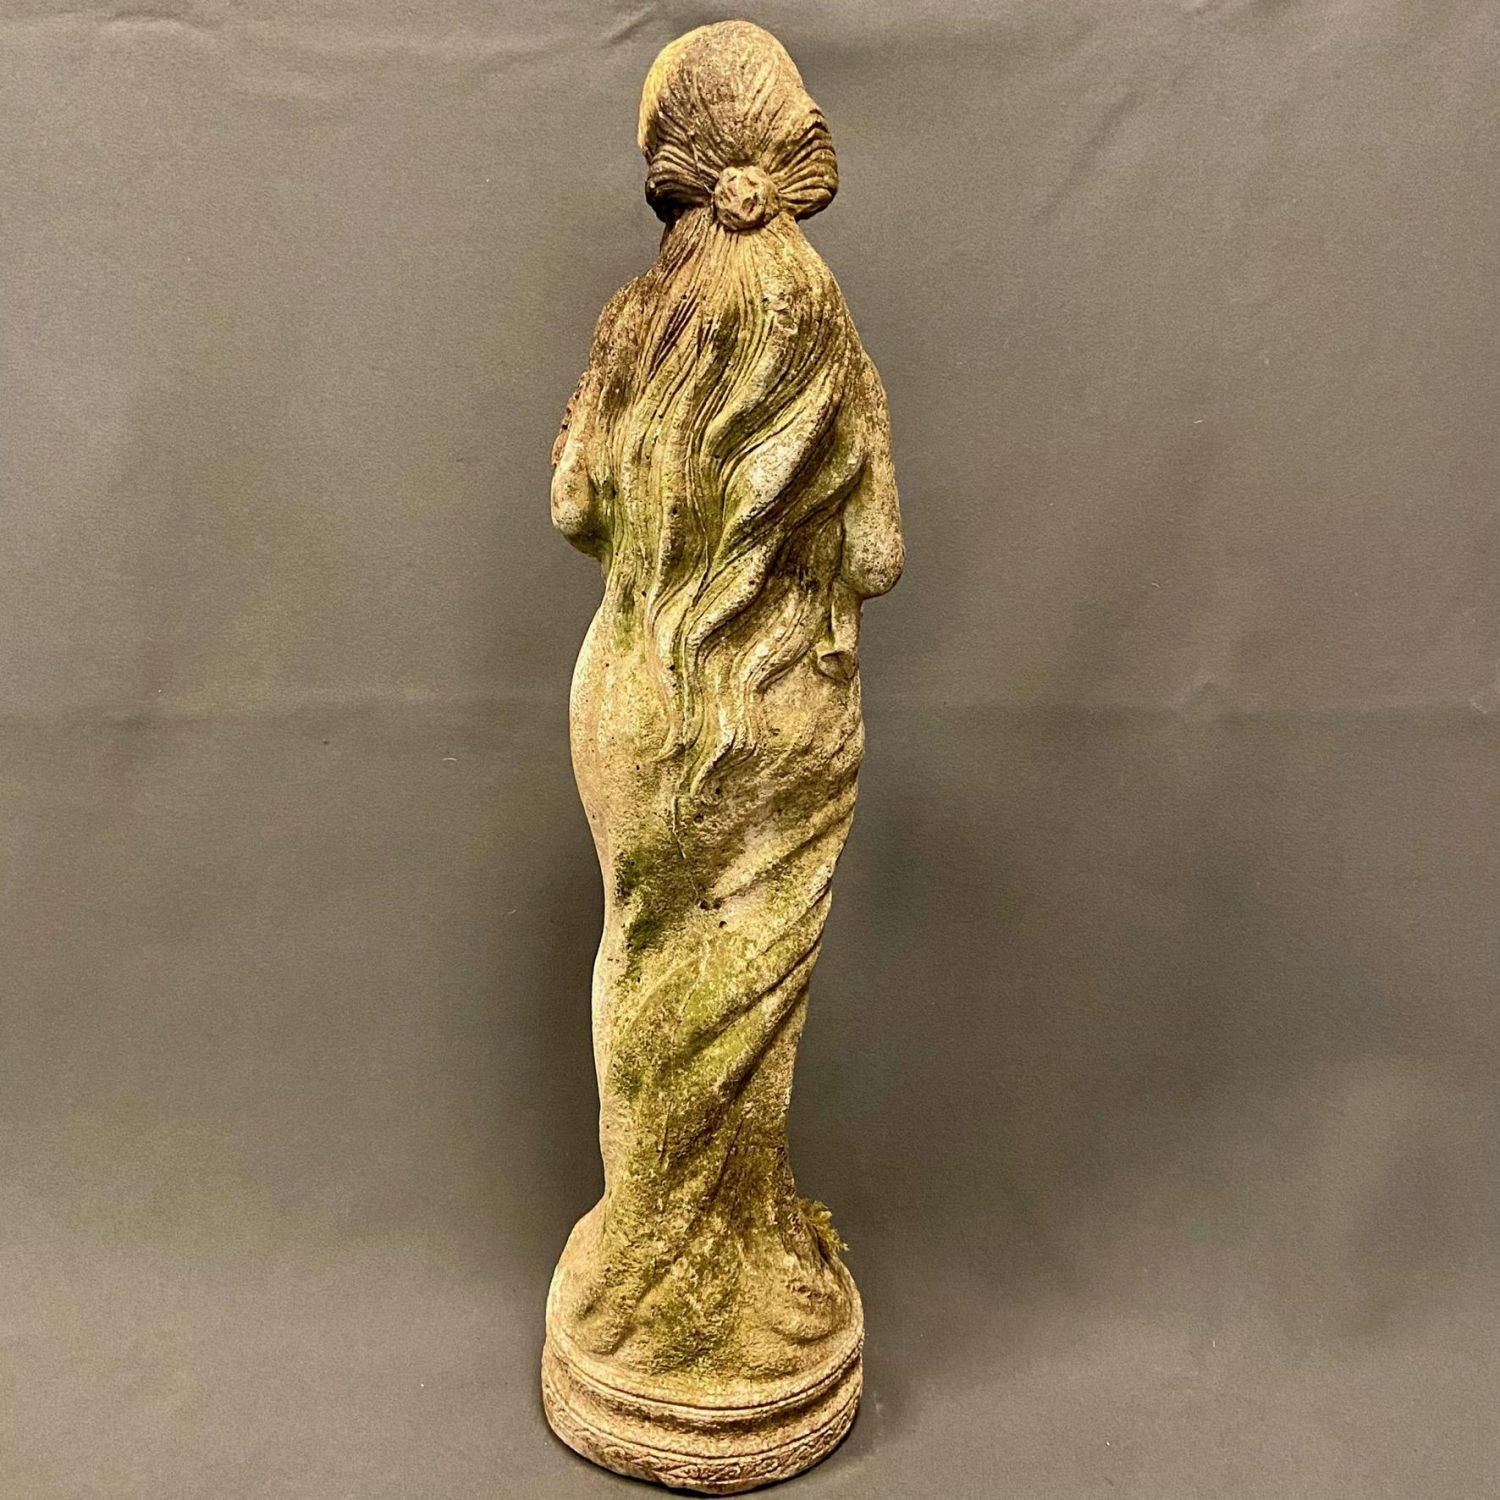 Decorative Garden Statuette of a Lady With Flowers - Architectural